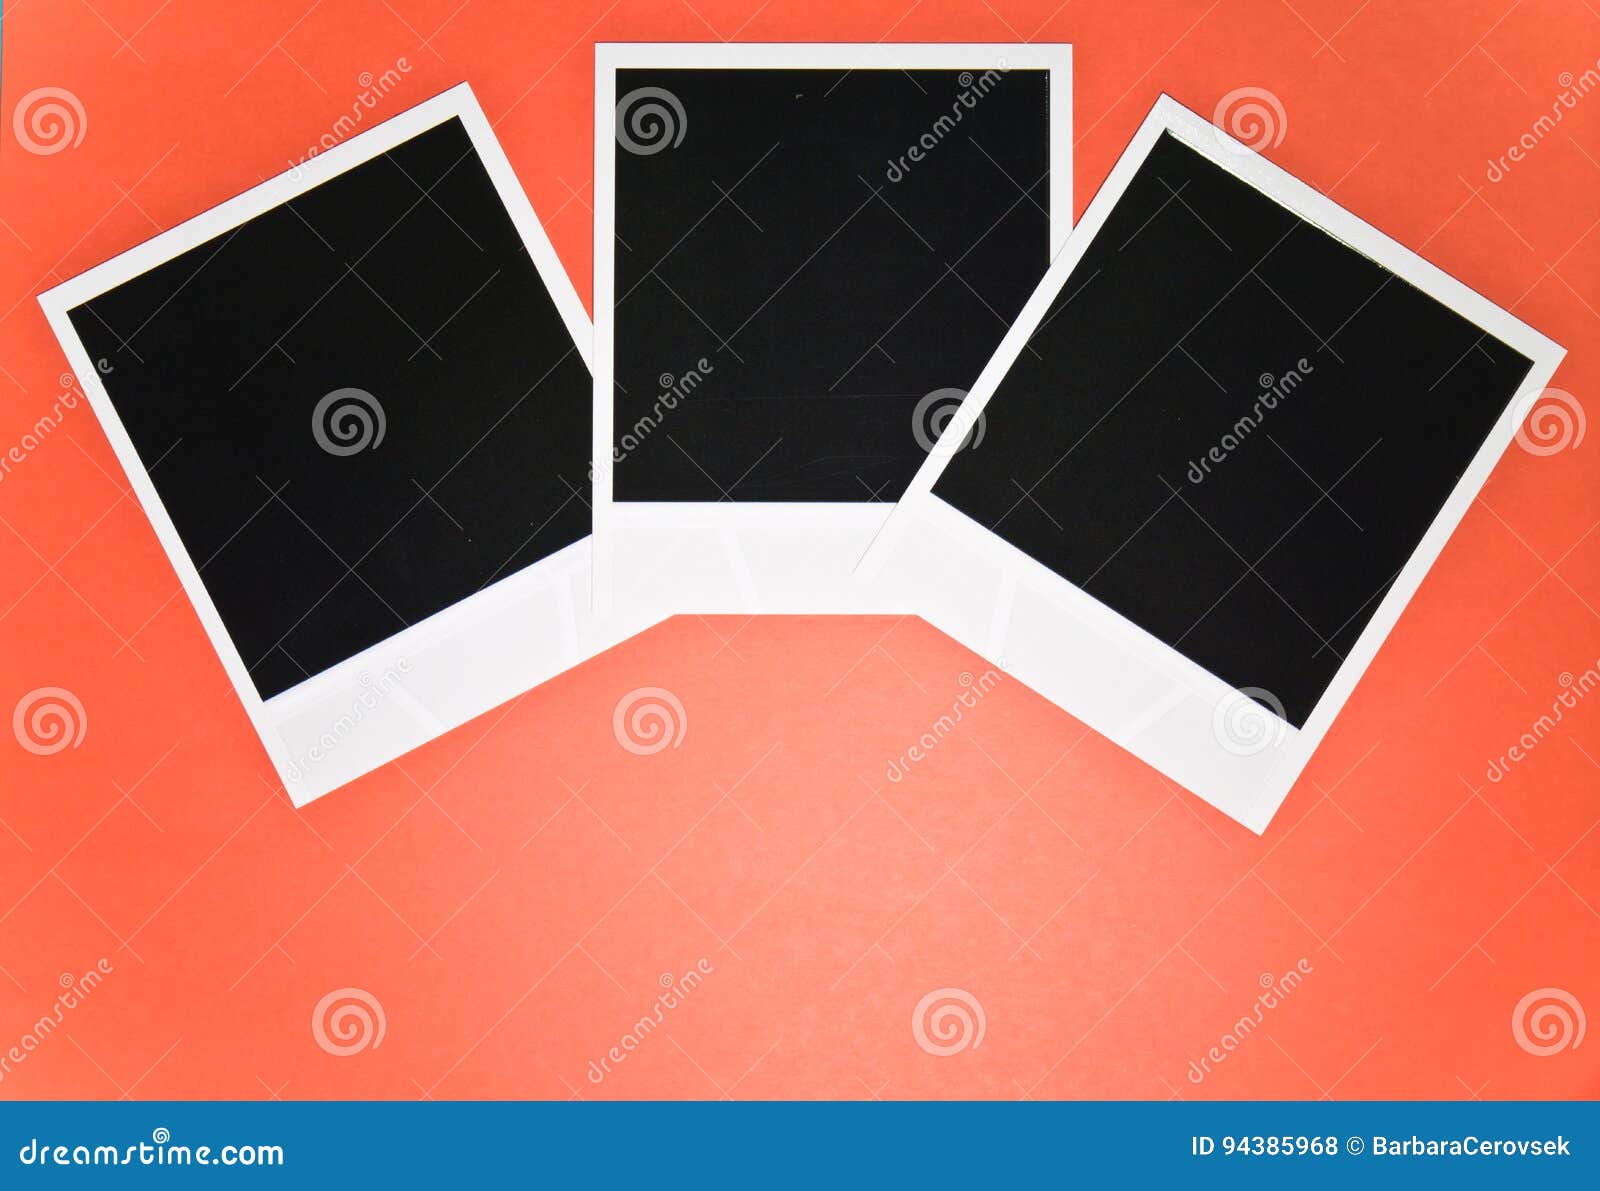 fløjte udslettelse Forbedre Three Blank Instant Photo Frames on Red Background with Copy Space Top View  Stock Photo - Image of paper, blank: 94385968